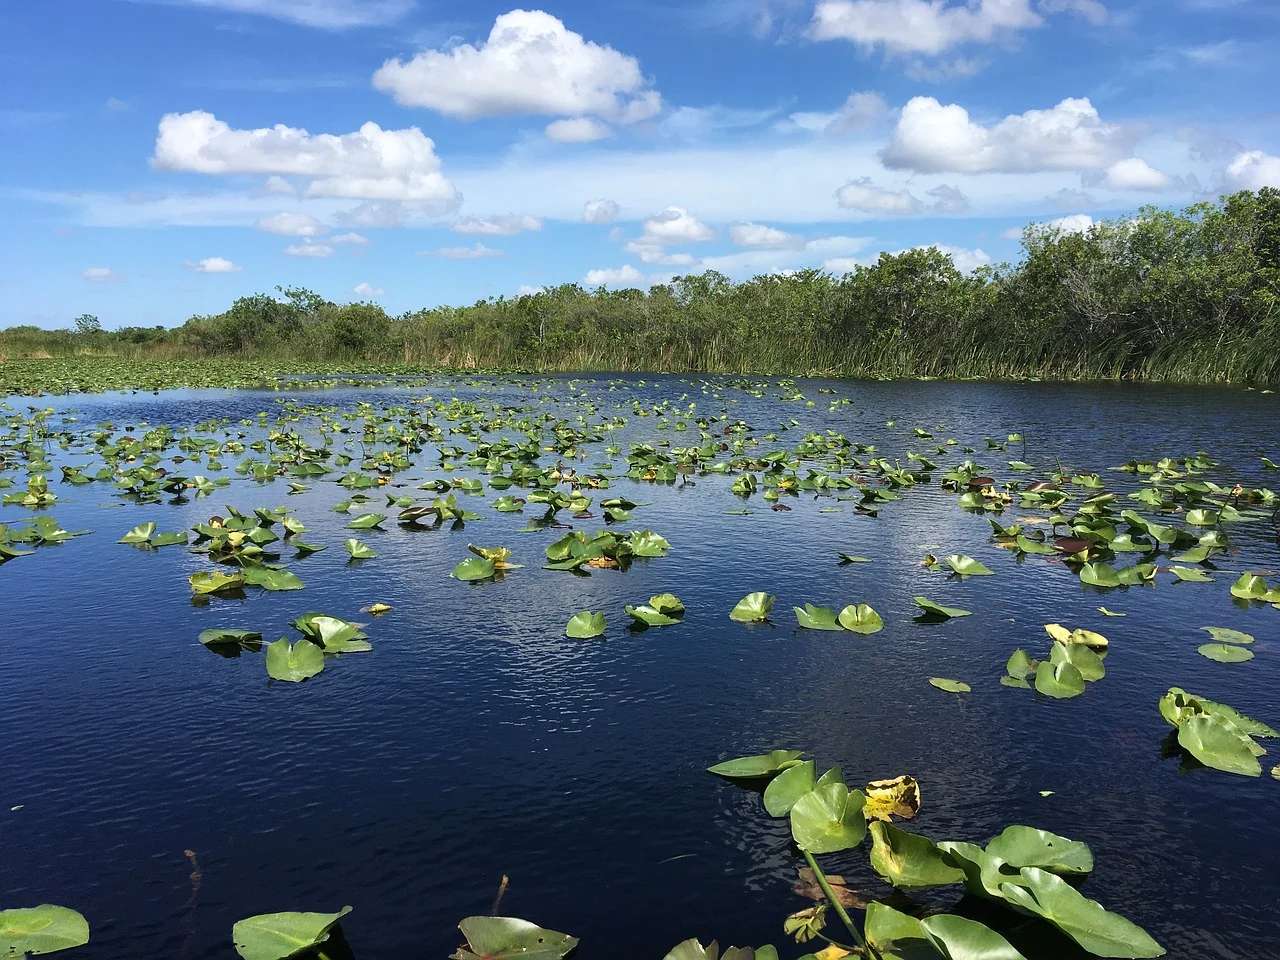 Lake Blue Cypress - the largest lake by volume in Florida